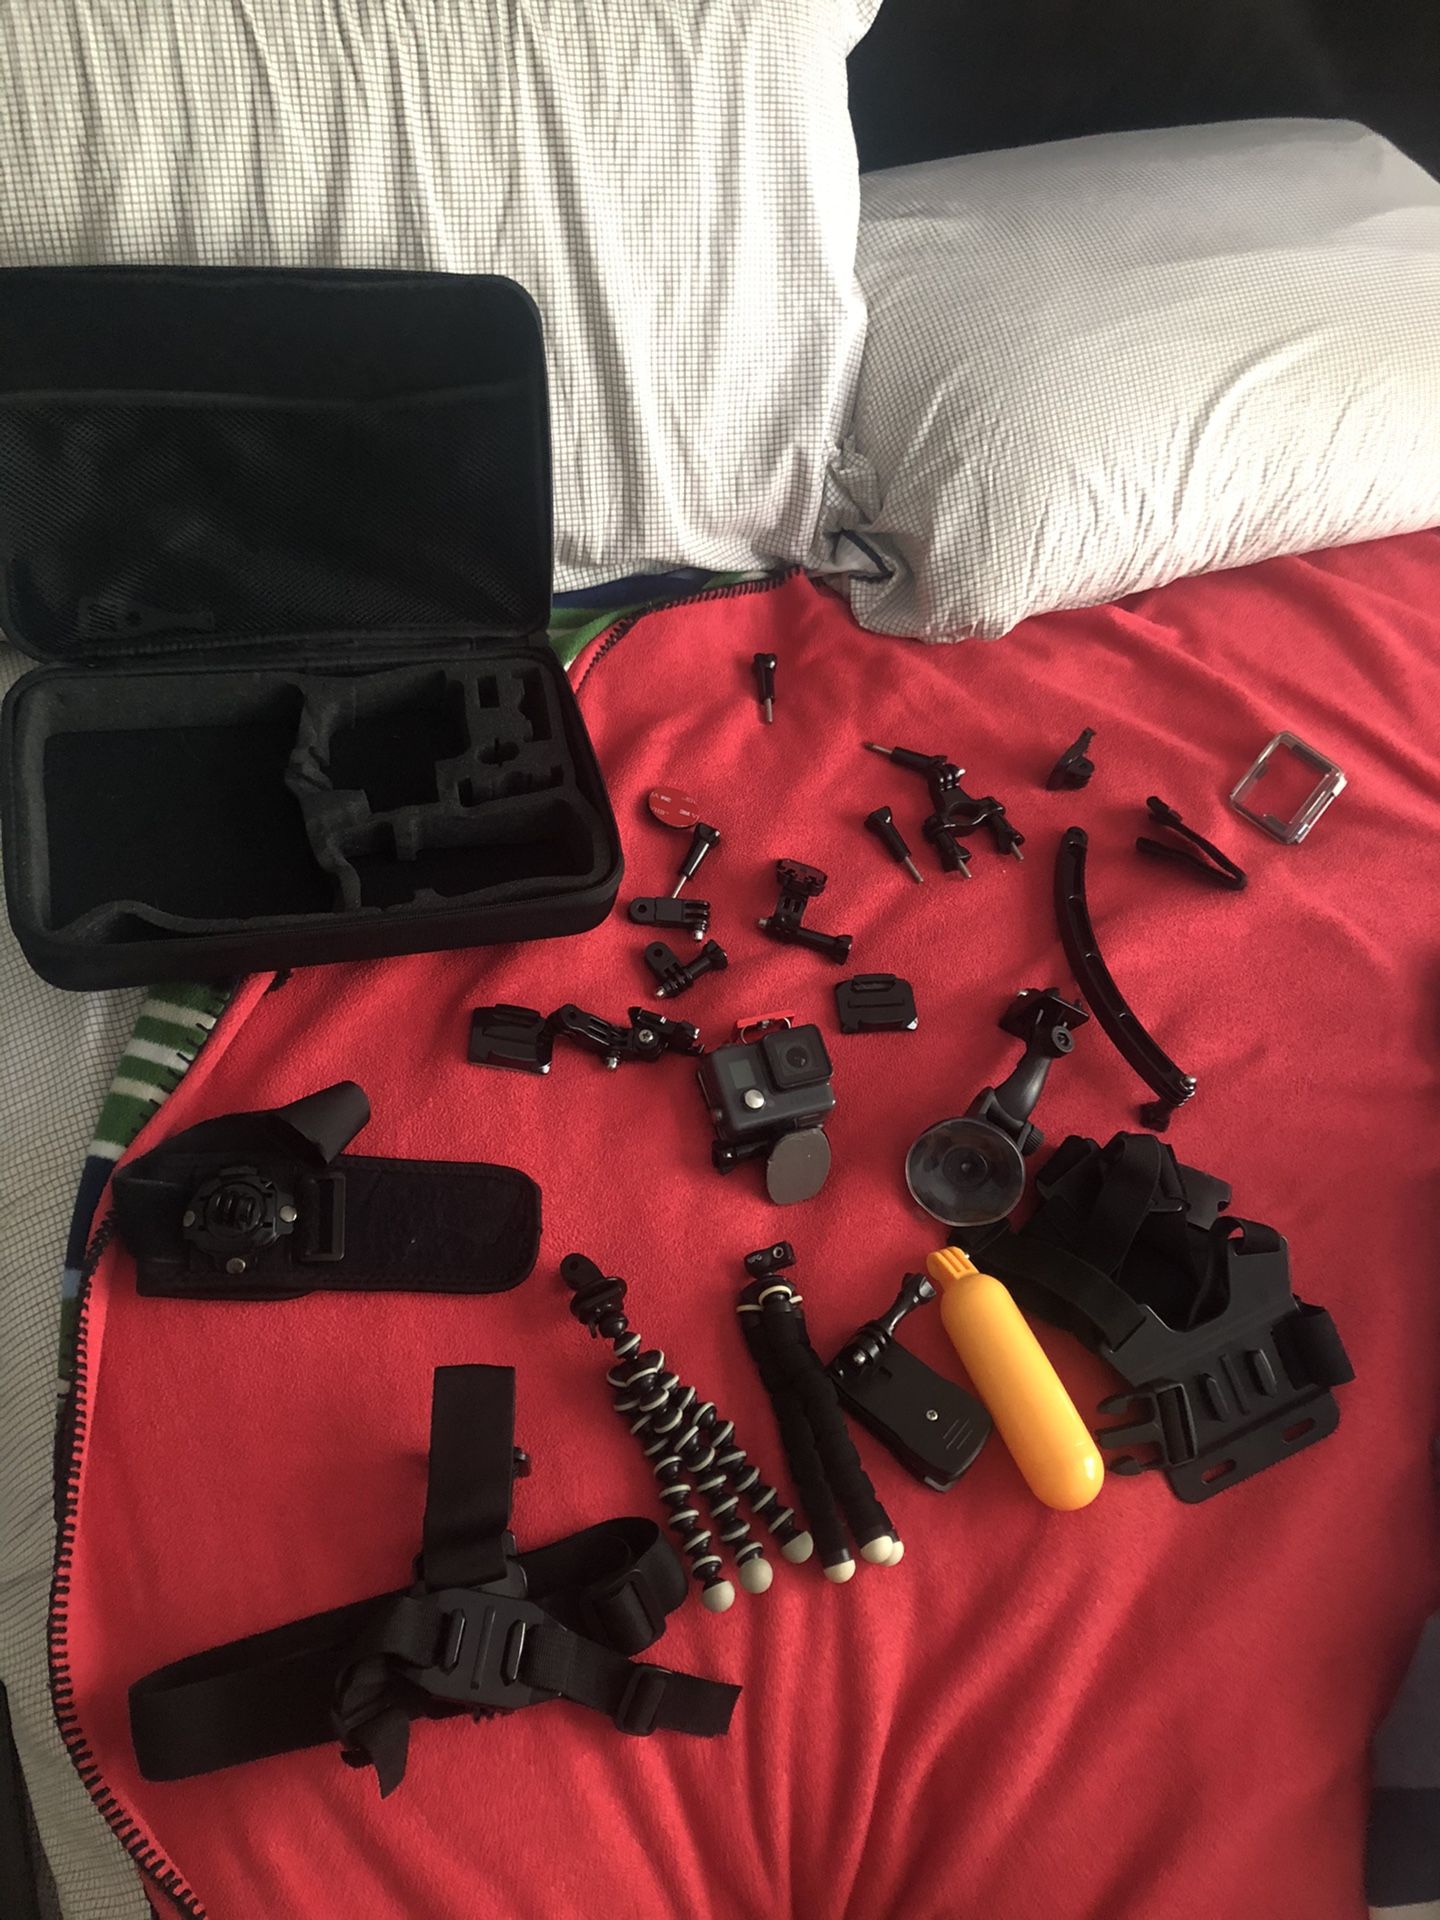 GoPro hero plus with many accessories